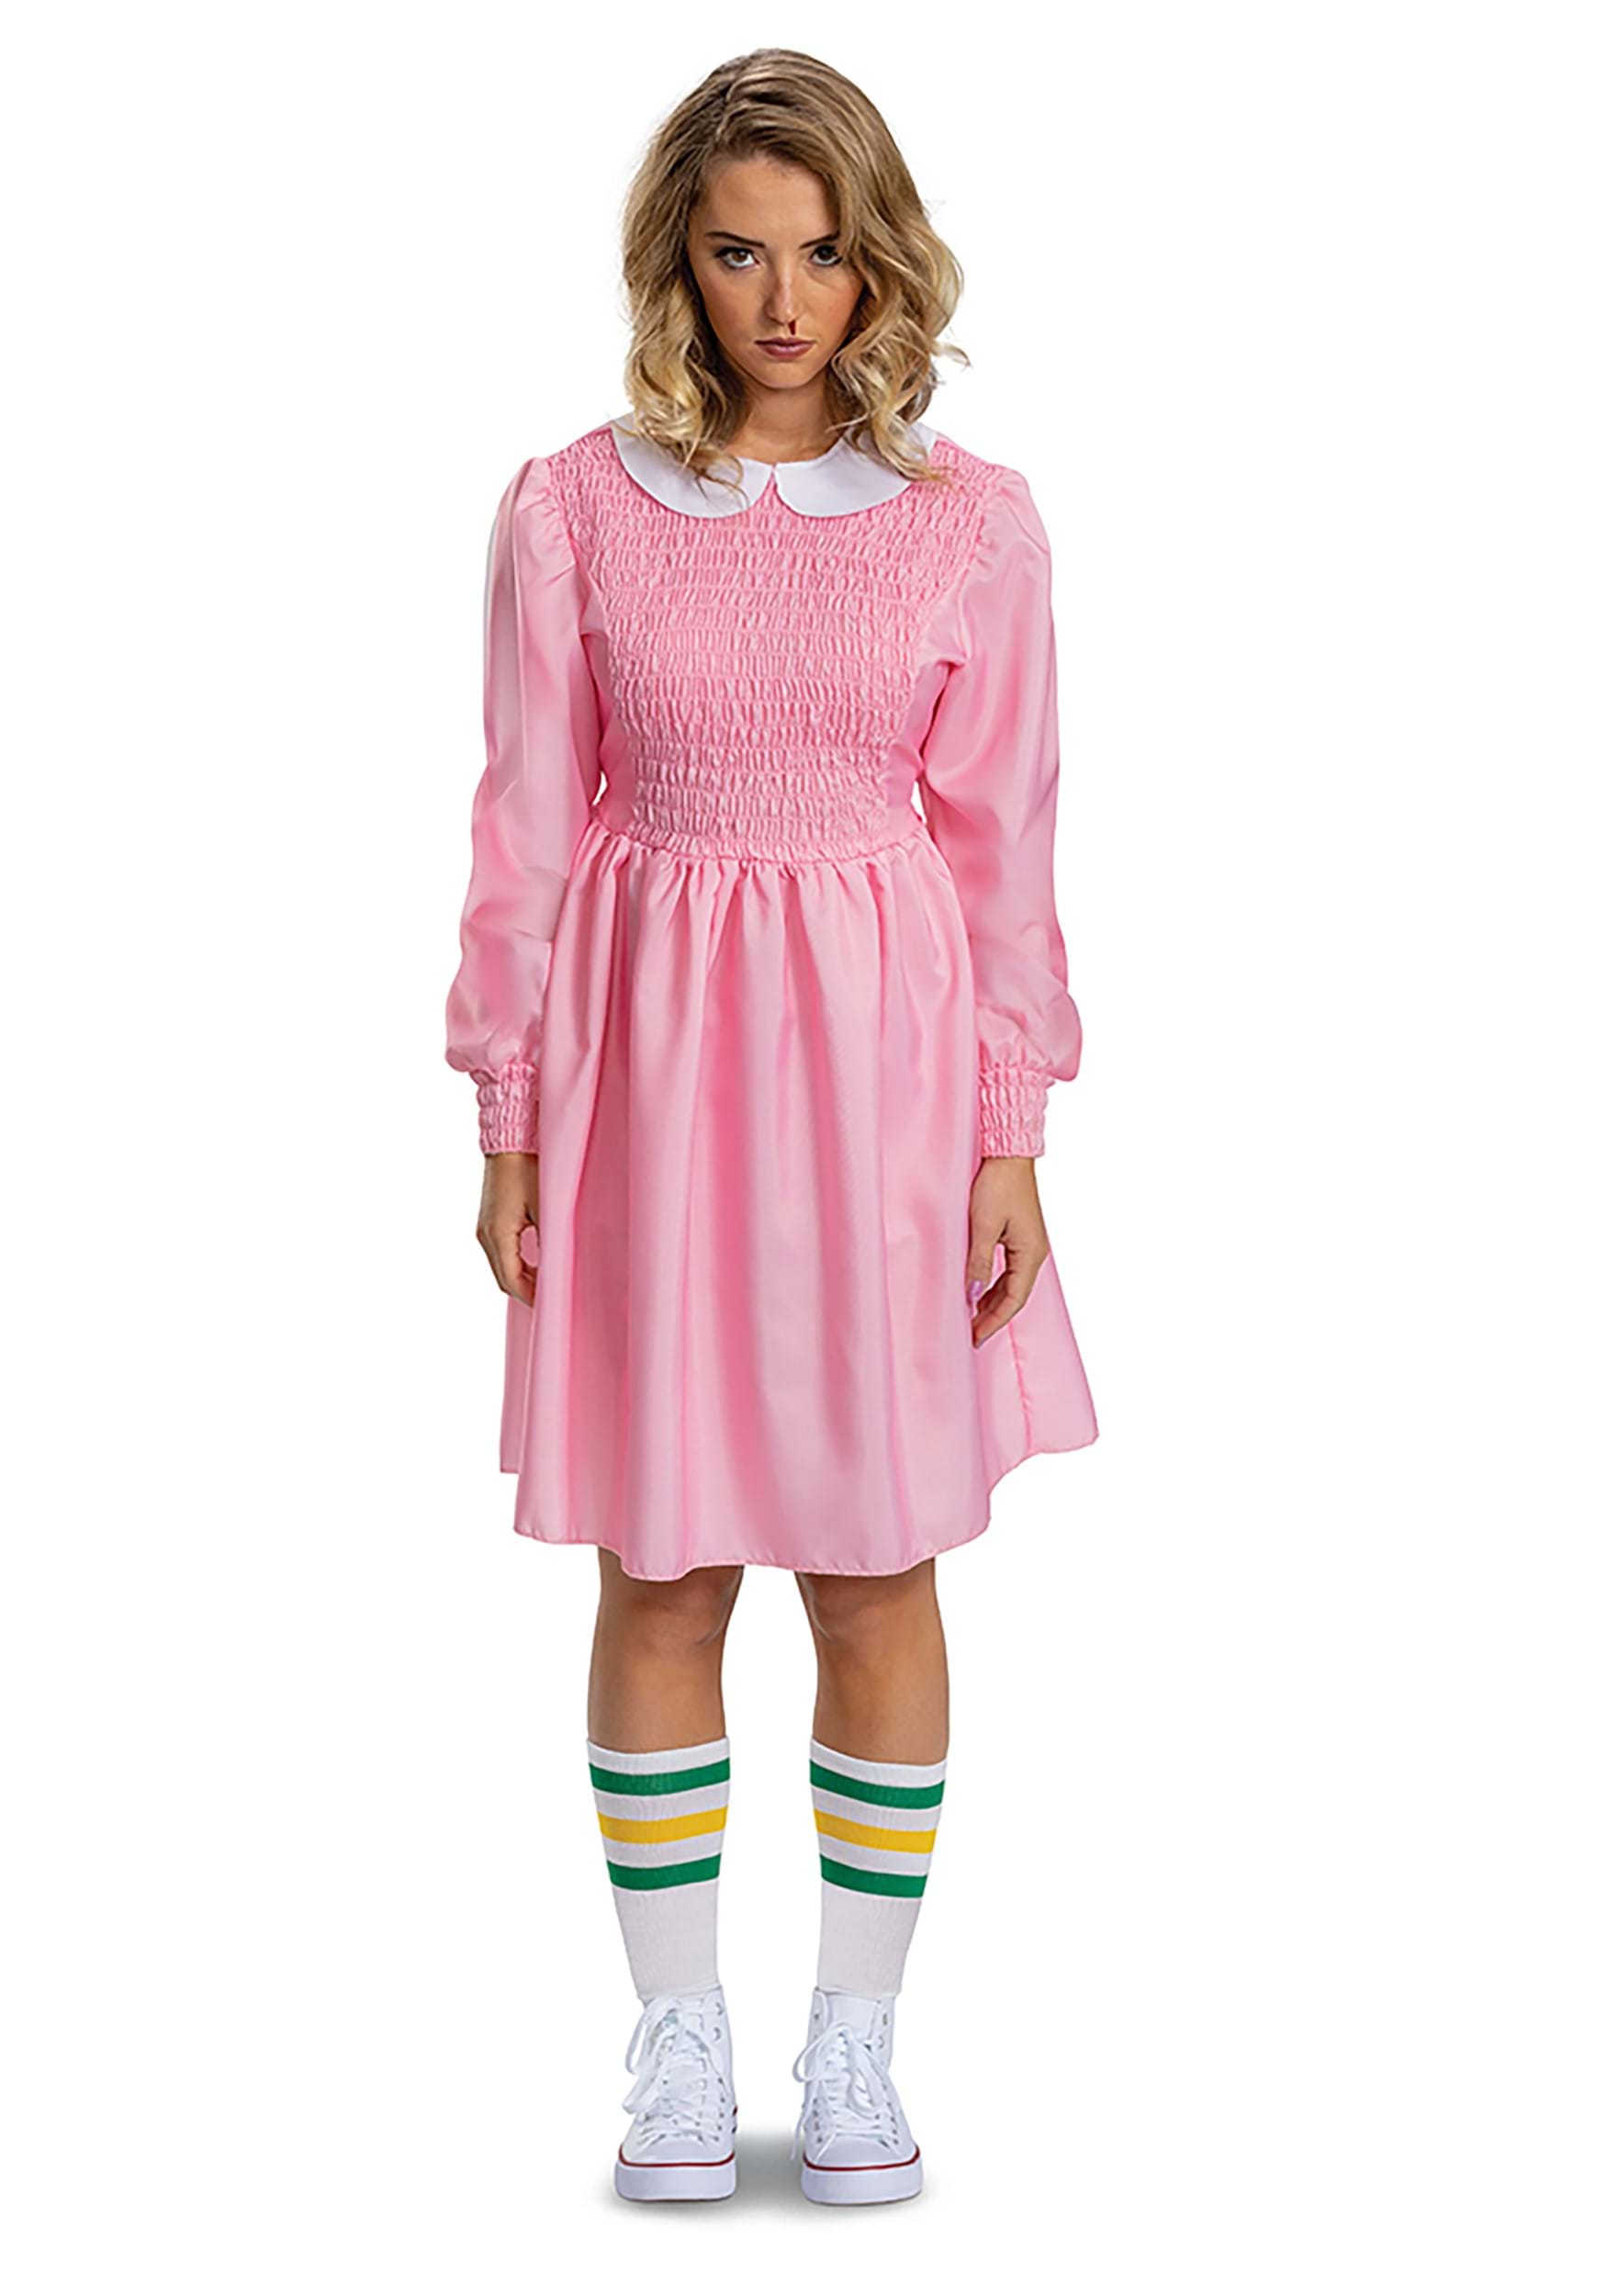 Photos - Fancy Dress Deluxe Disguise Stranger Things Women's  Pink Dress Eleven  Cost 